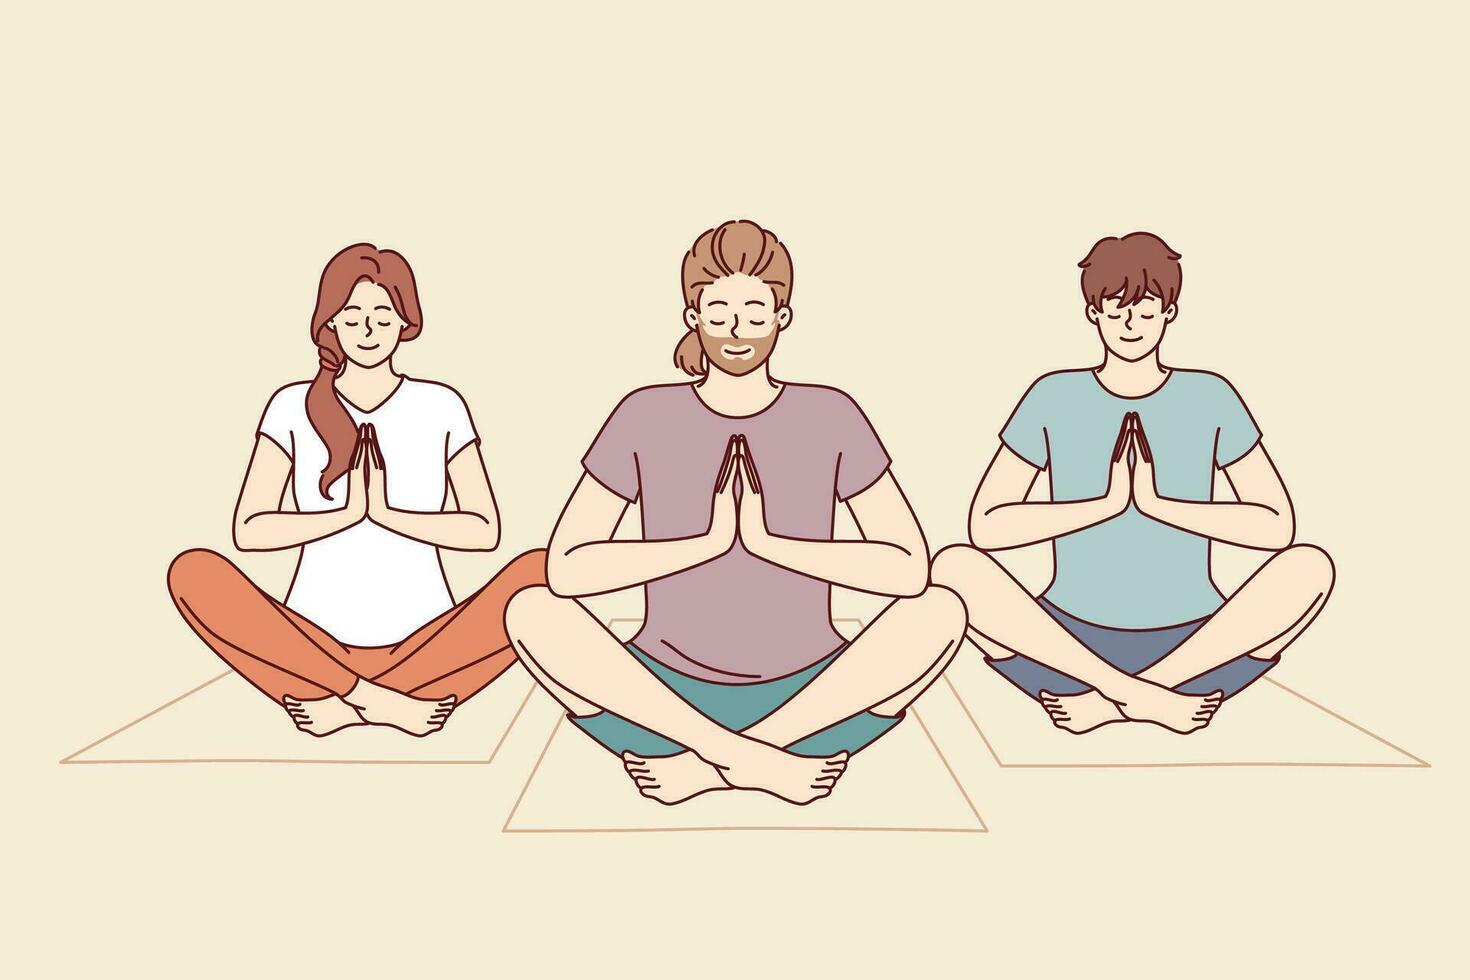 People do meditation and yoga sitting on fitness mats and taking lotus position to do zen practice. Friends meditate and do yoga to cleanse soul and improve mental state after difficult life period. vector